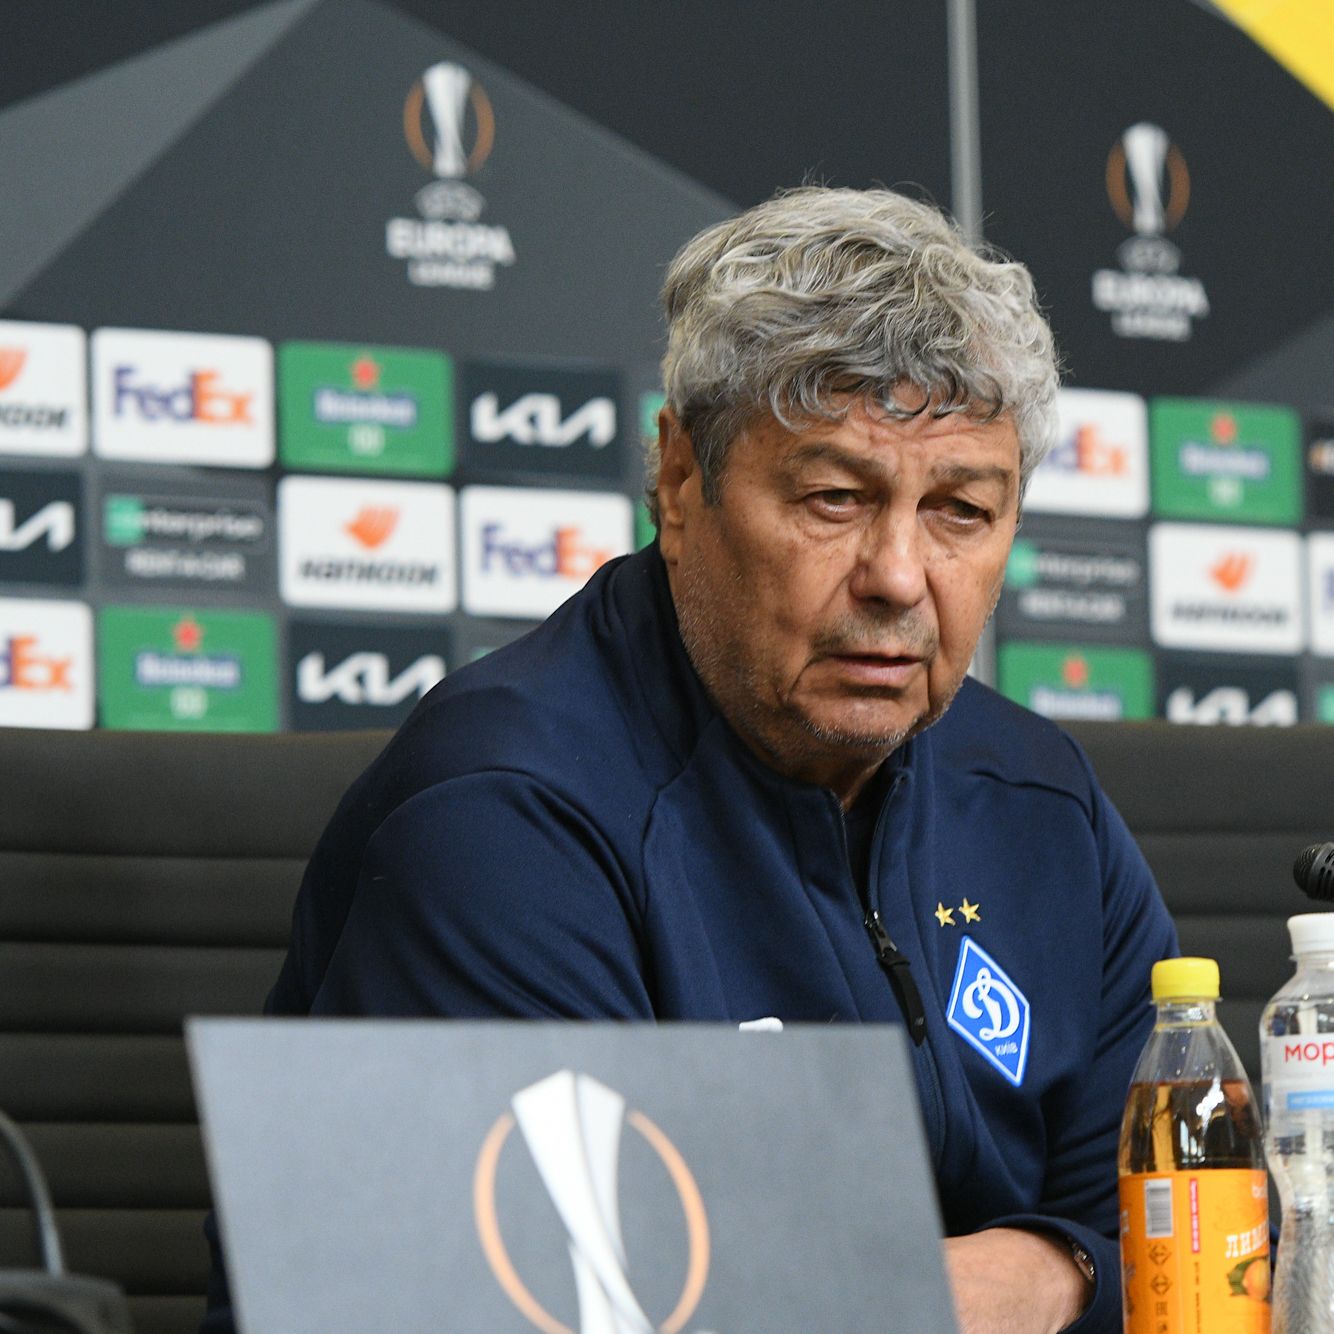 Press conference of Mircea Lucescu after the game against Brugge